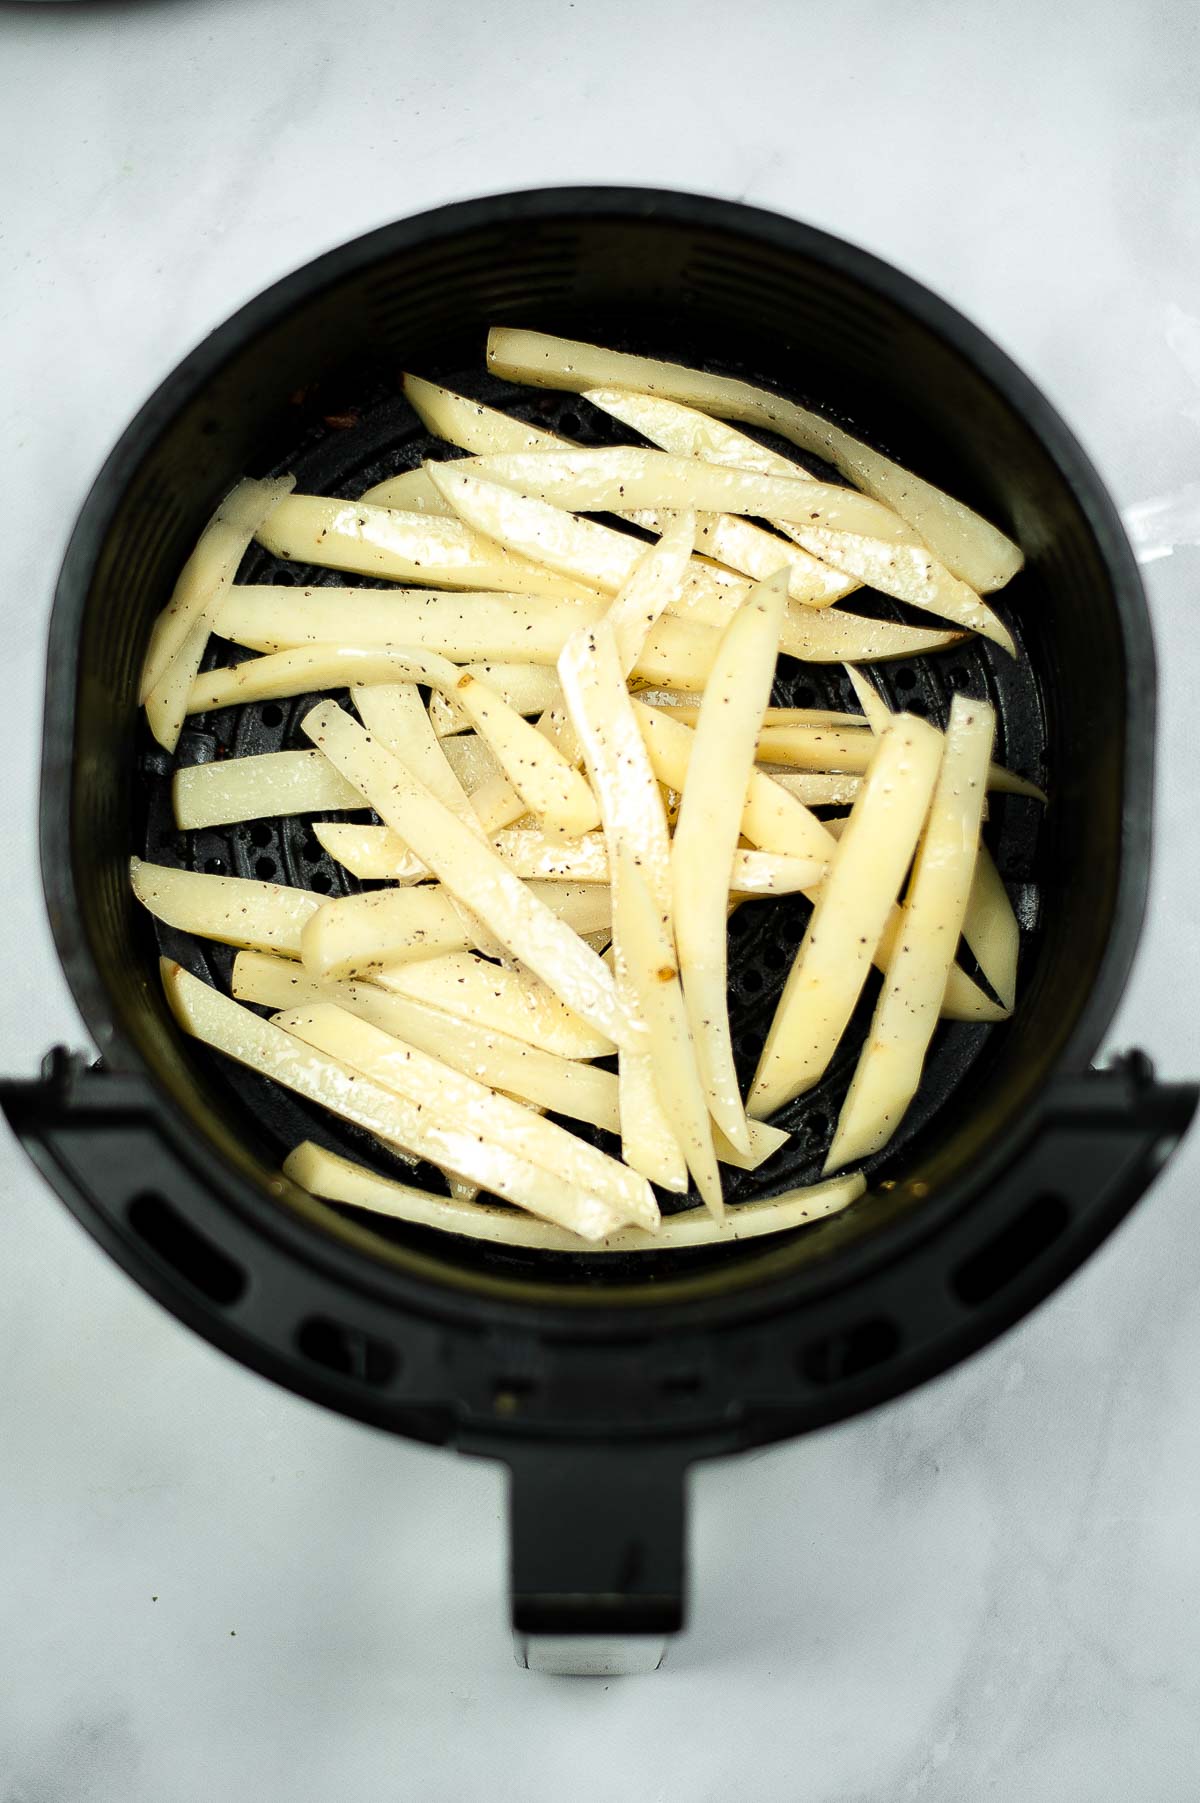 Uncooked potato fries in an air fryer basket